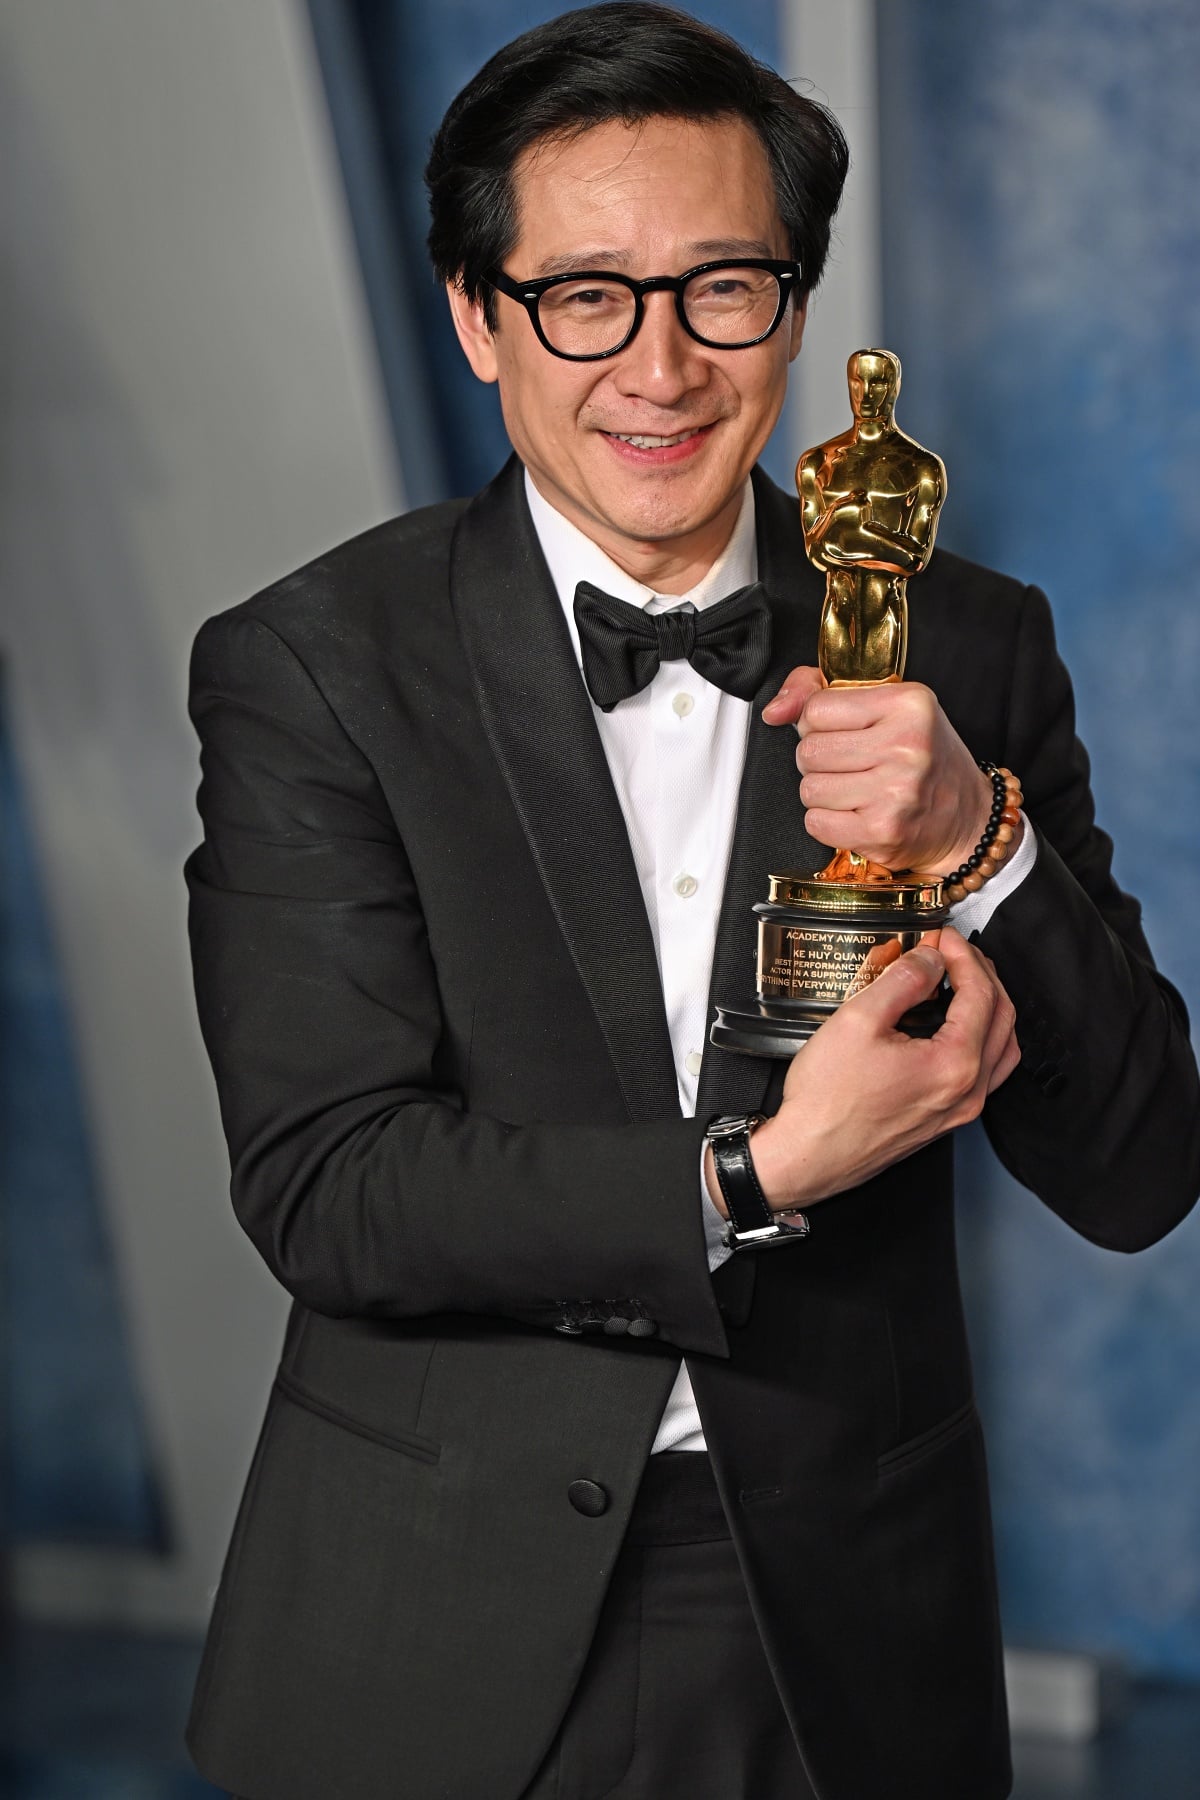 Ke Huy Quan showing off his Academy Award for Best Supporting Actor for his work in Everything Everywhere All at Once at the 2023 Vanity Fair Oscar Party